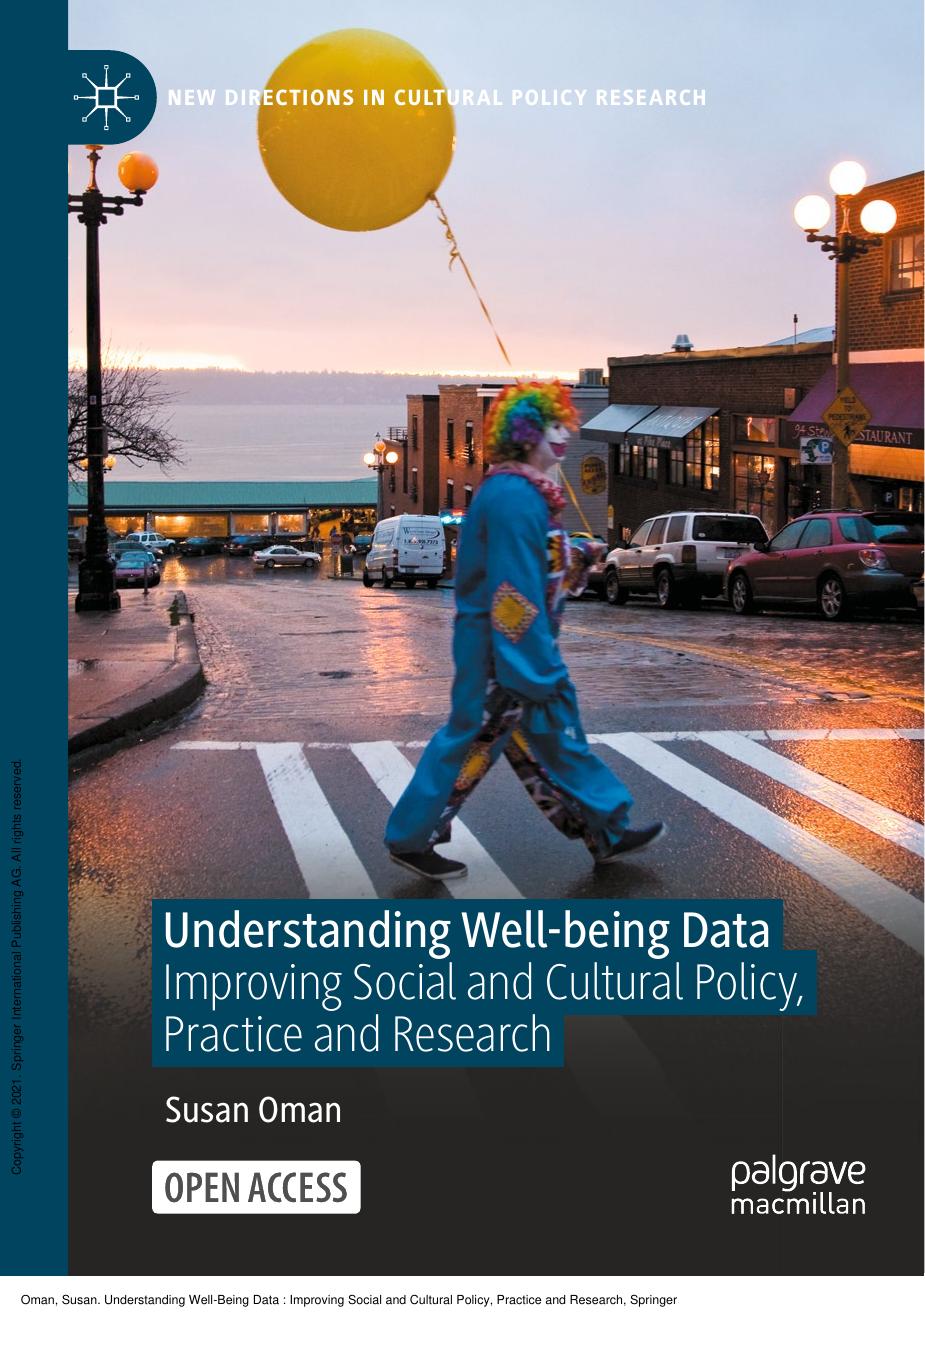 Understanding Well-Being Data : Improving Social and Cultural Policy, Practice and Research by Susan Oman